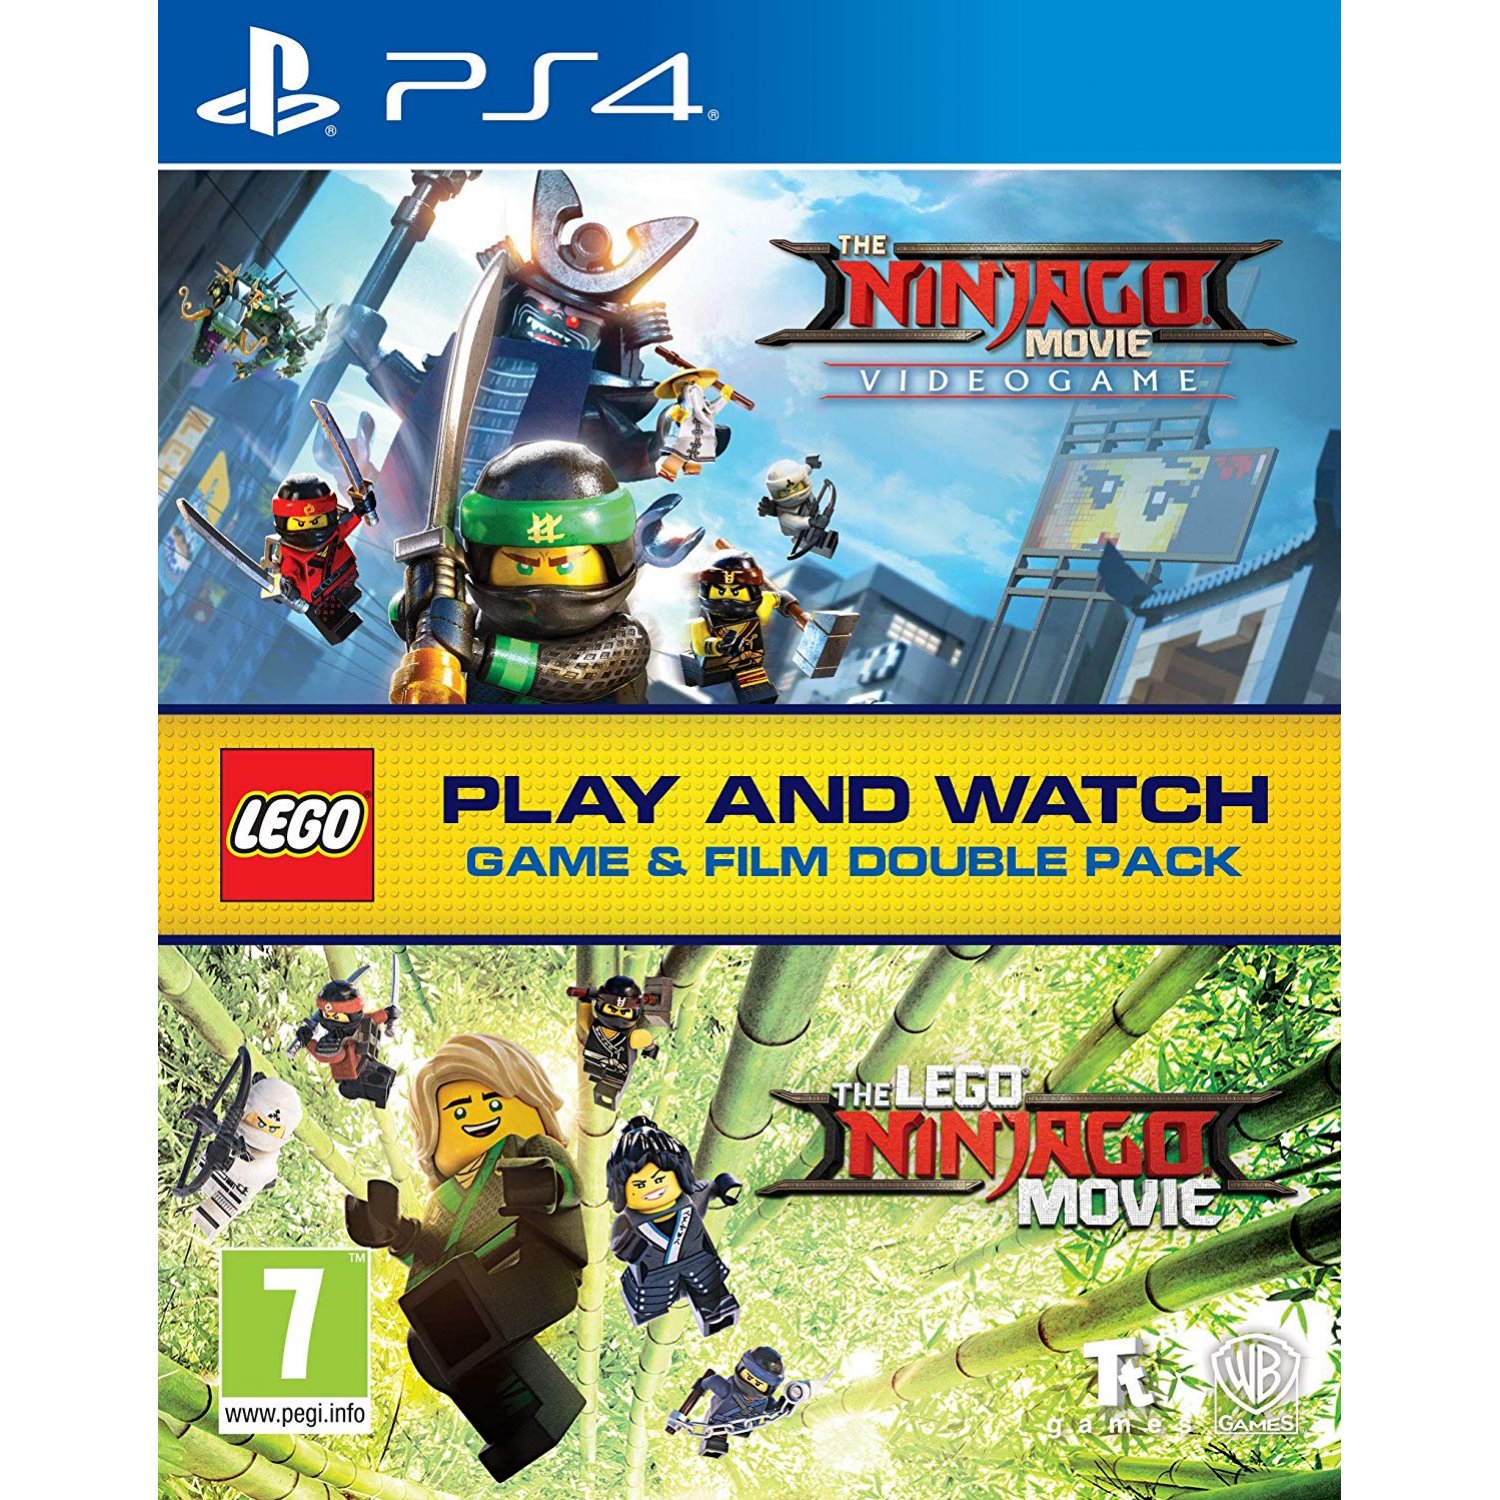 The LEGO Ninjago Movie Videogame Play and Watch Game and Film Double Pack